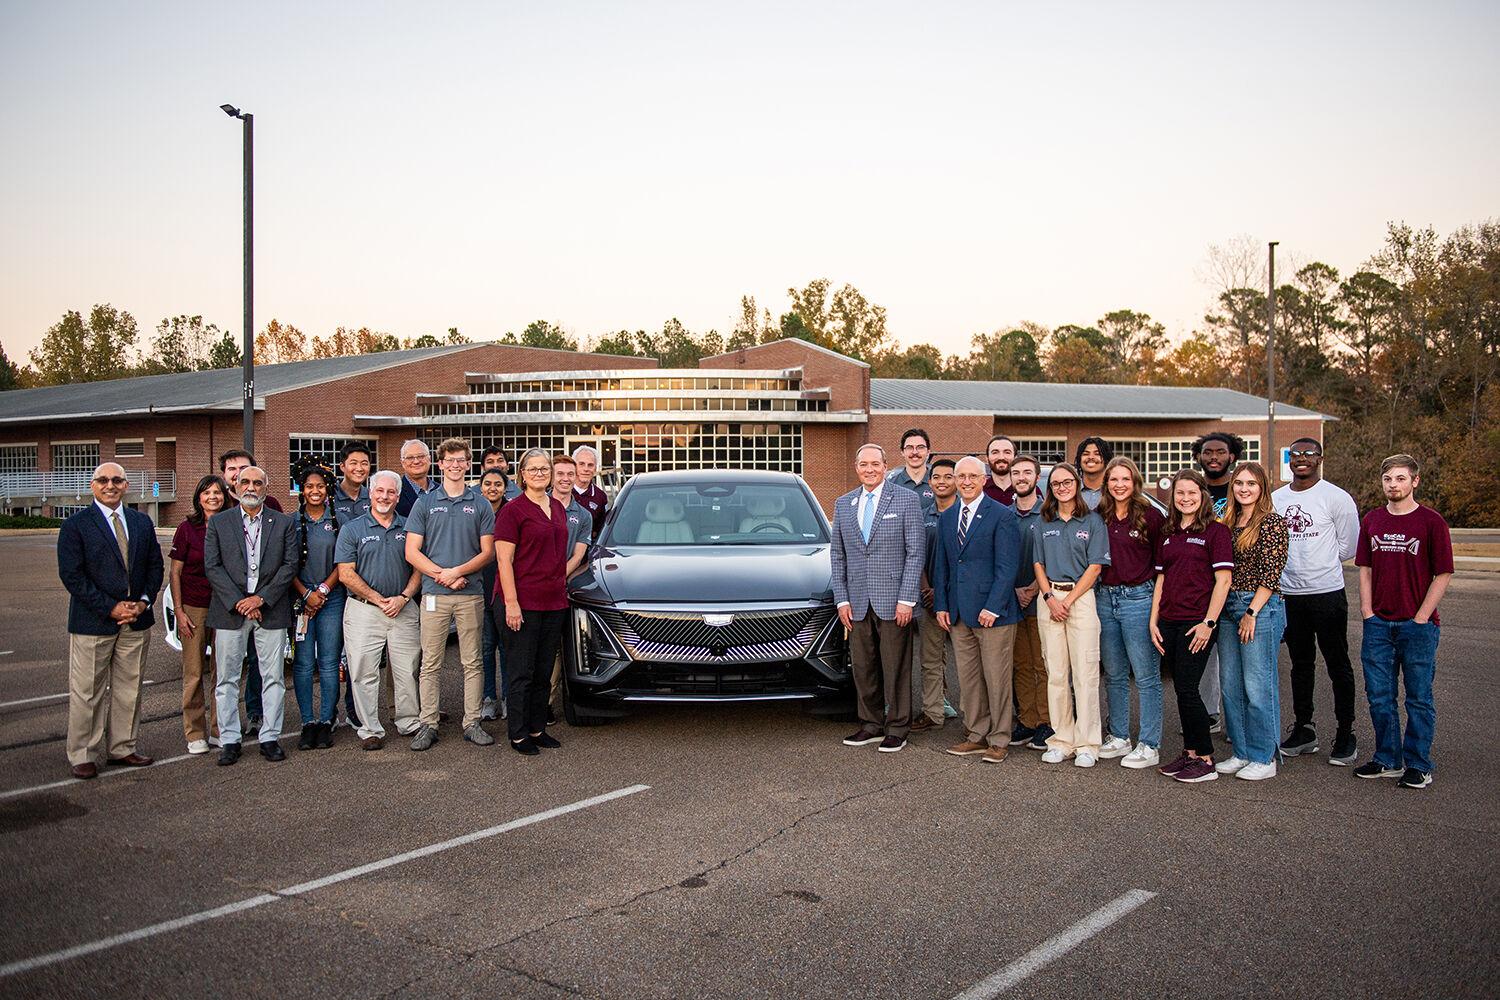 MSU President Mark E. Keenum and Provost David Shaw, center right, along with Vice President for Research and Economic Development Julie Jorden, left of car, are pictured with MSU's student EcoCAR Electric Vehicle Challenge team members, along with faculty advisors who will help guide the team during the prominent four-year competition to implement an all-electric powertrain and other cutting-edge features in a new Cadillac LYRIQ. The program develops students to become leaders in the automotive and related engineering fields. Photo by Grace Cockrell. 